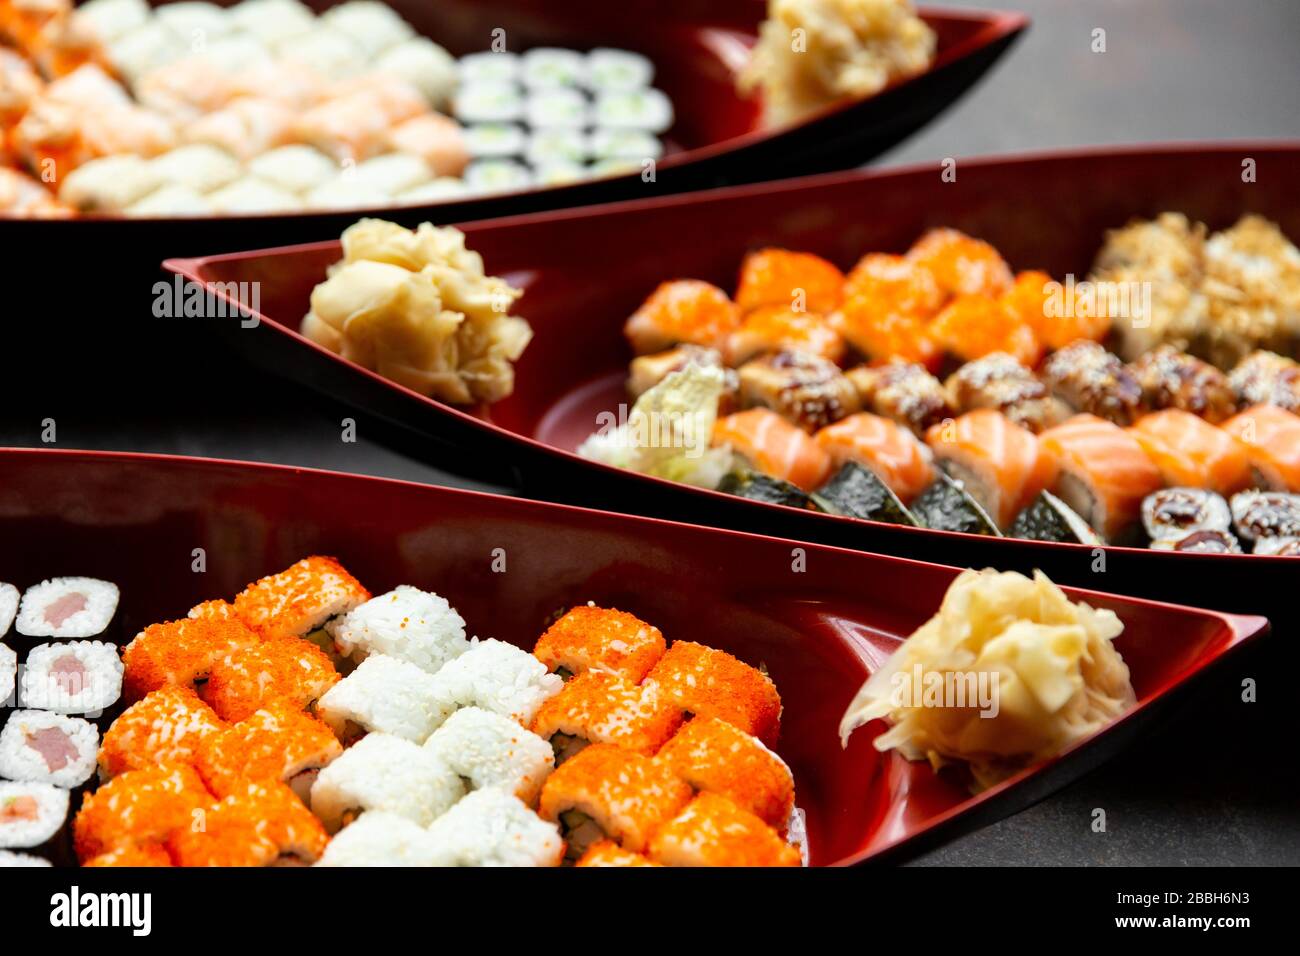 japanese sushi food. Various kinds of sushi served on a boat close up. Big set of rolls on a plate in a restaurant. Stock Photo